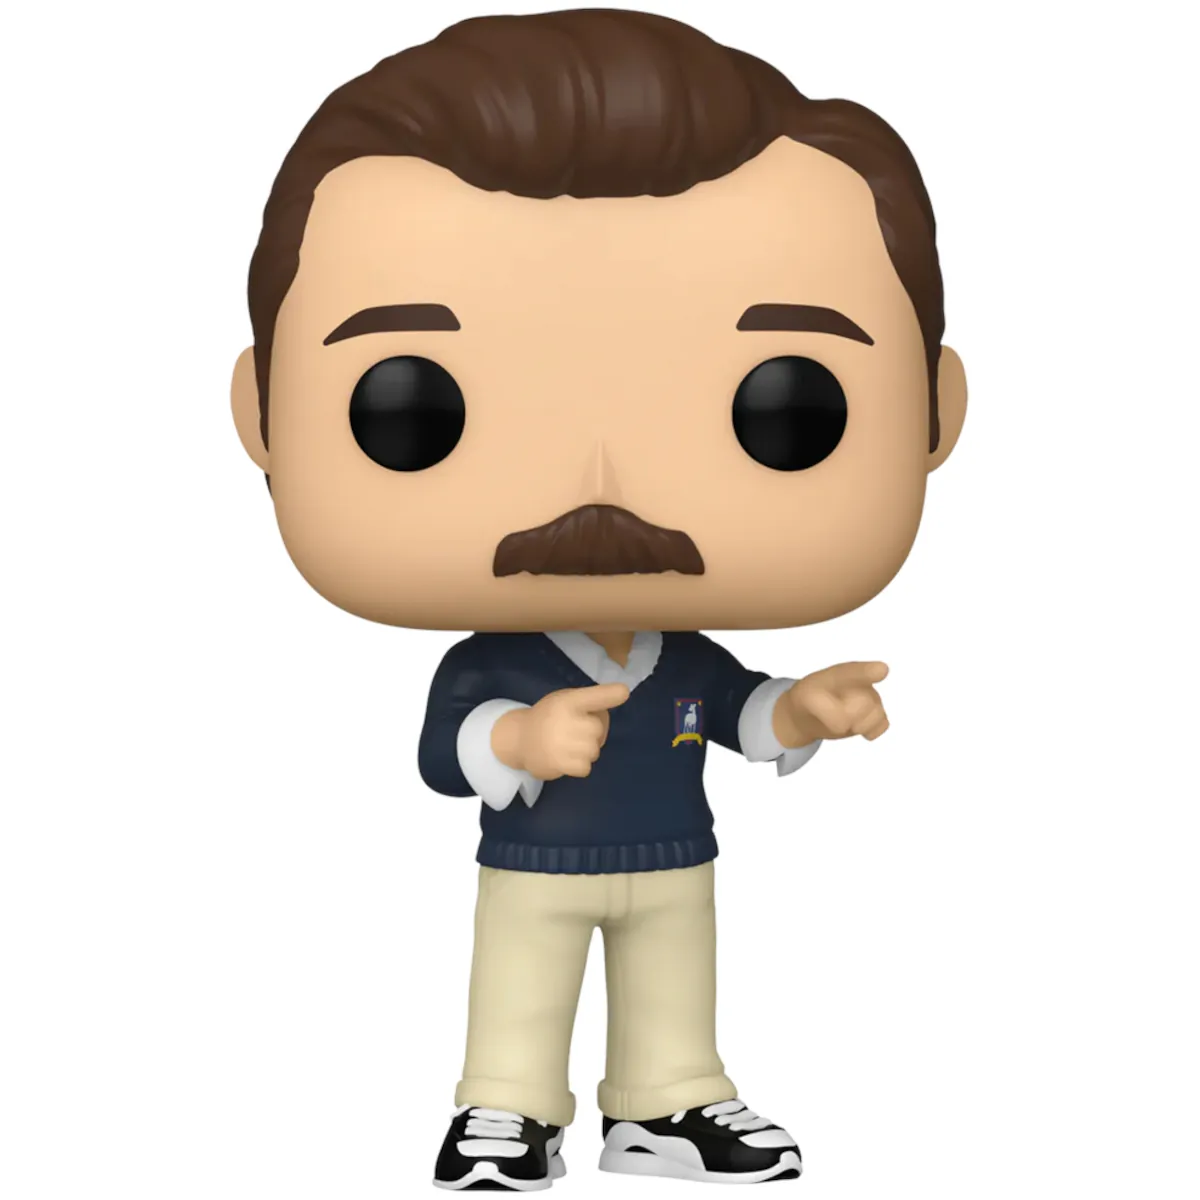 75718 Funko Pop! Television - Ted Lasso - Ted Lasso (Pointing) Collectable Vinyl Figure